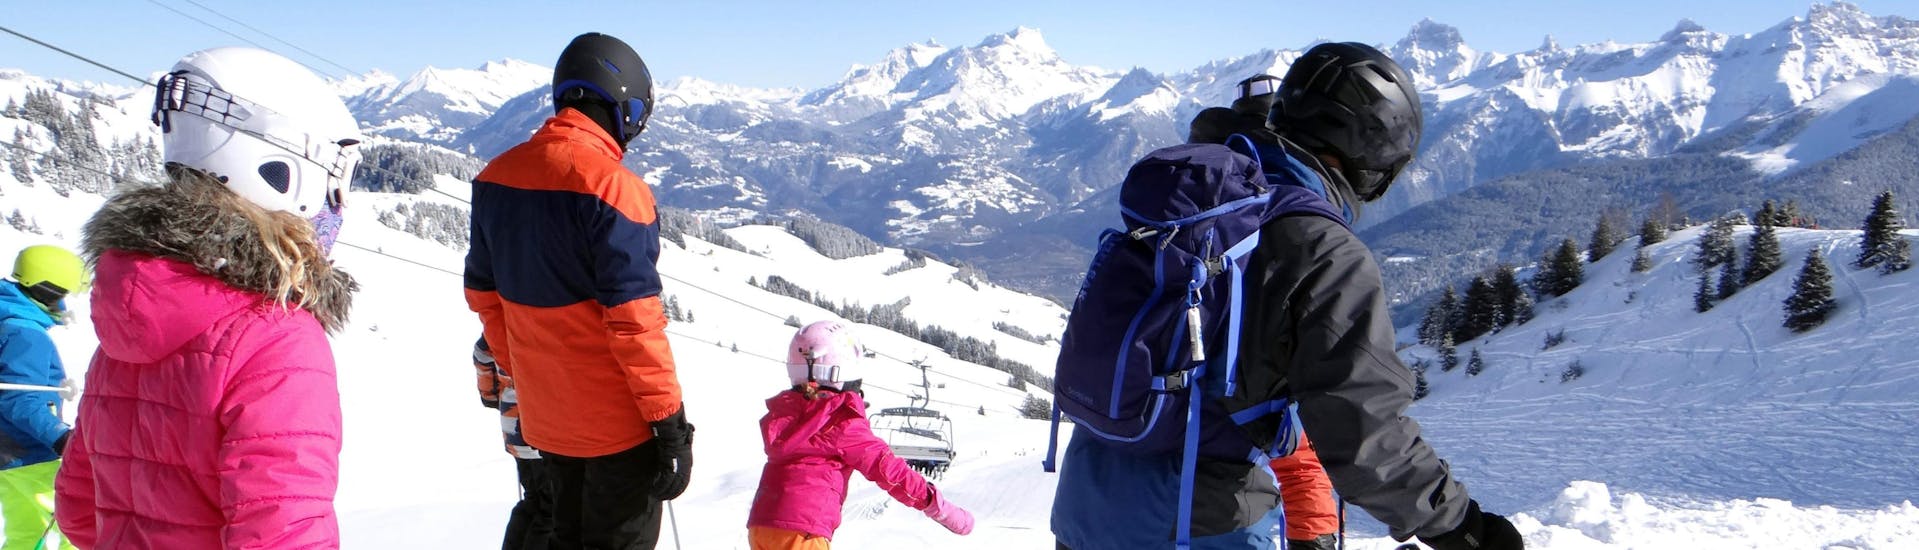 A family is skiing down one of the ski slopes in the ski resort of Morgins, a popular winter sports destination in the French part of Switzerland where visitors can book ski lessons with one of the local ski schools.